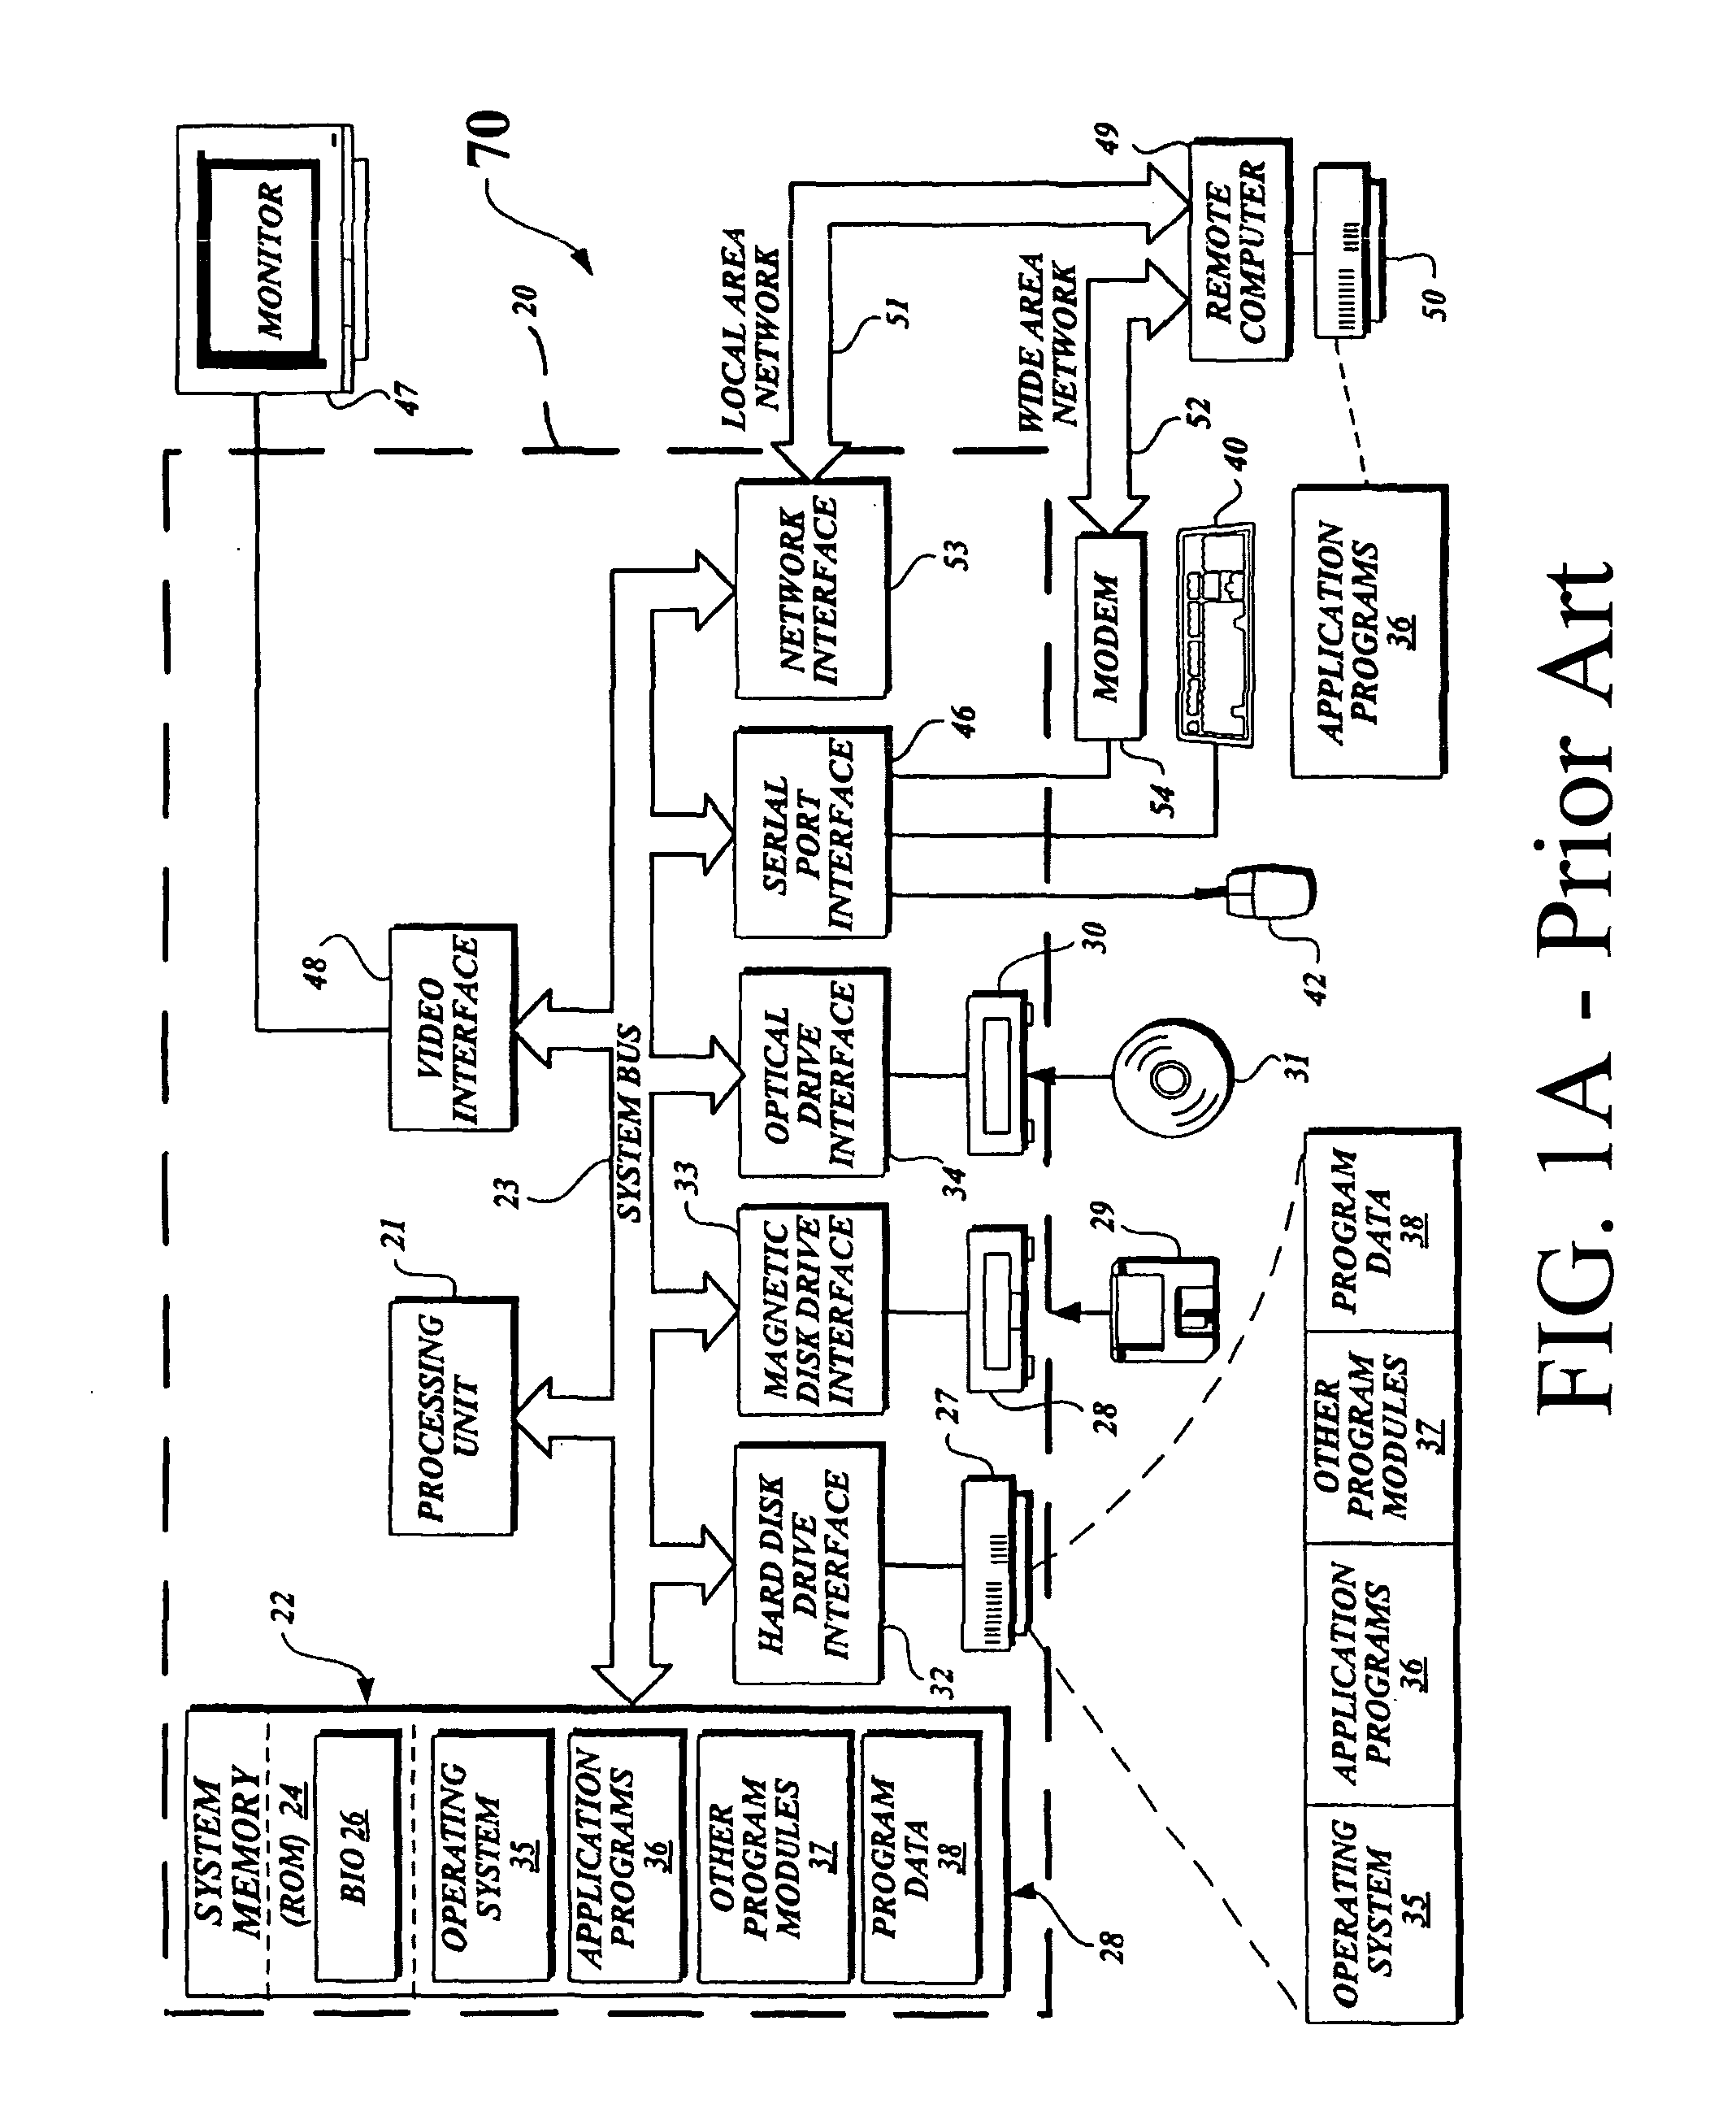 Dynamic associative storage security for long-term memory storage devices